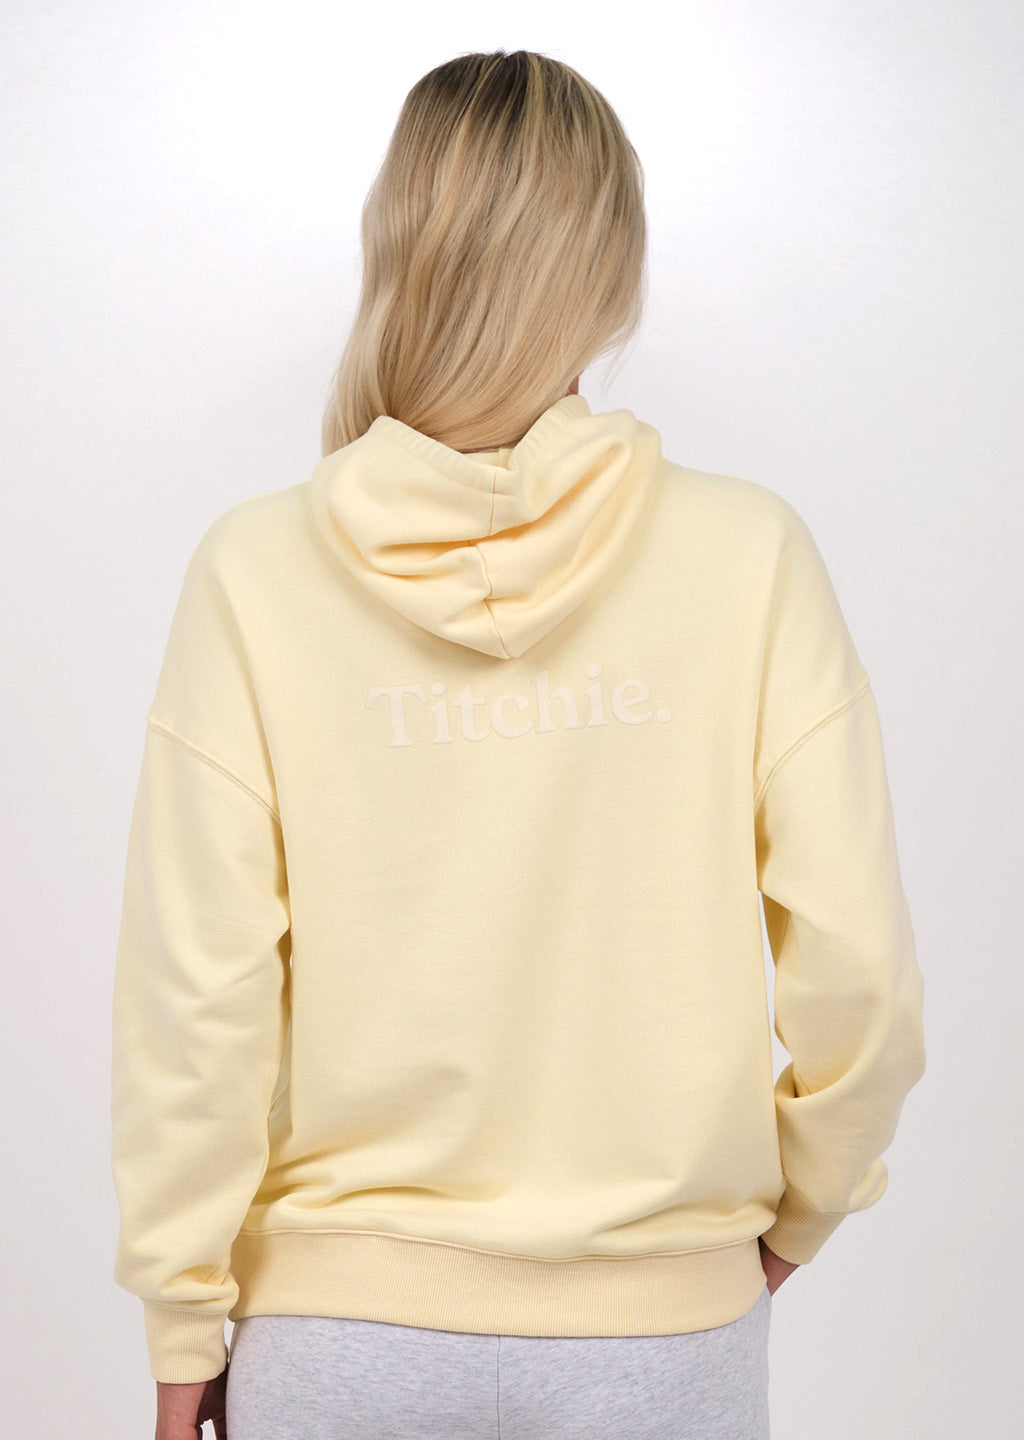 Titchie - Peachy Hoodie - Butter